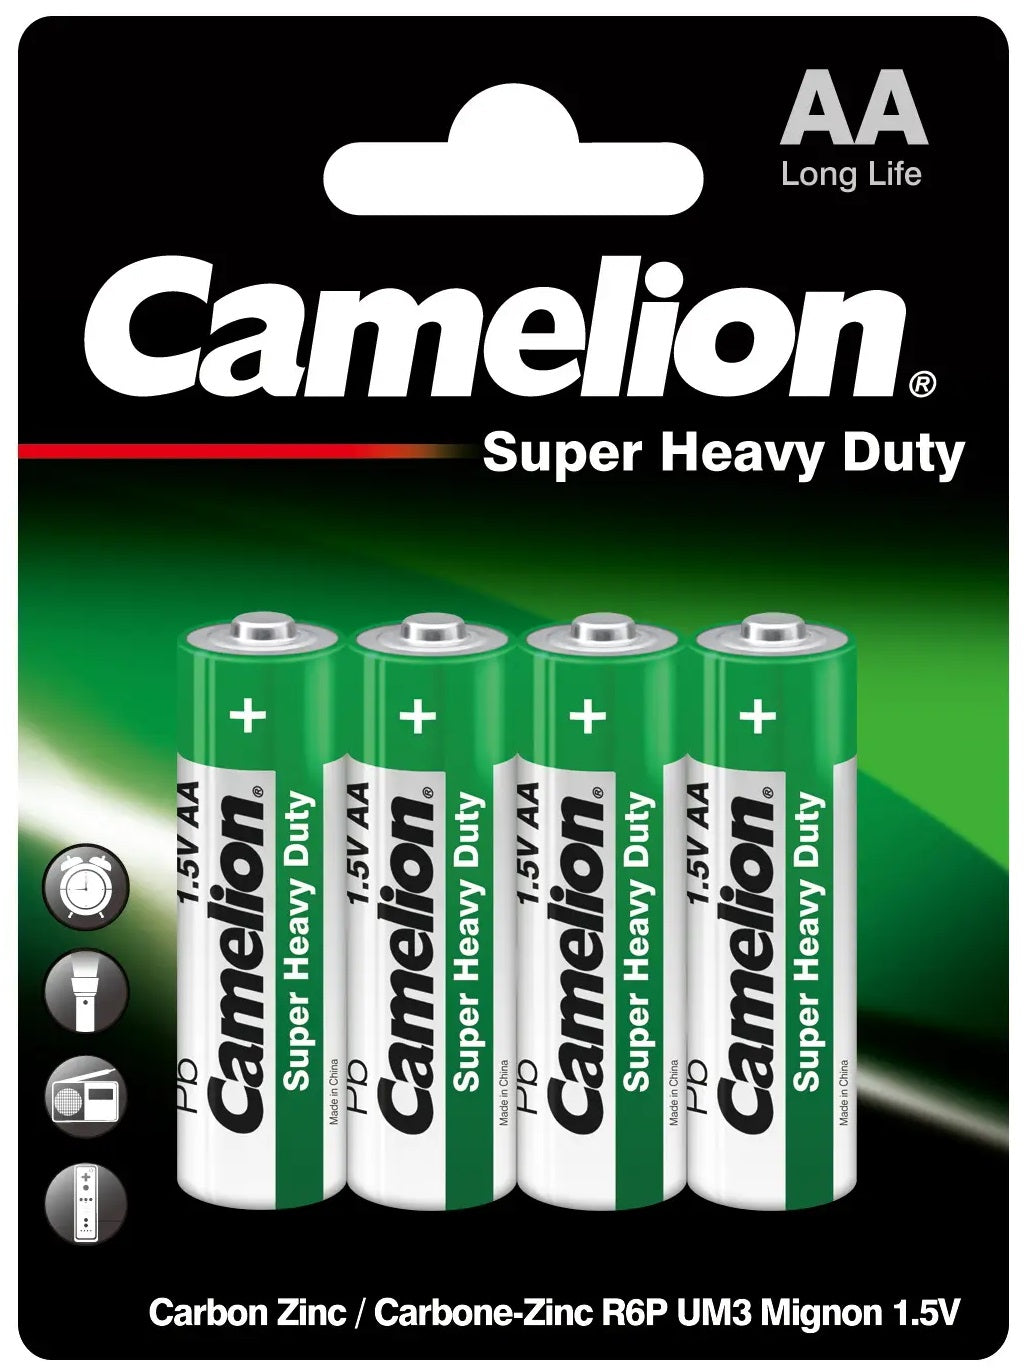 CAMELION AA SUPER HEAVY DUTY BATTERY - 4 PACK-(8122322288895)